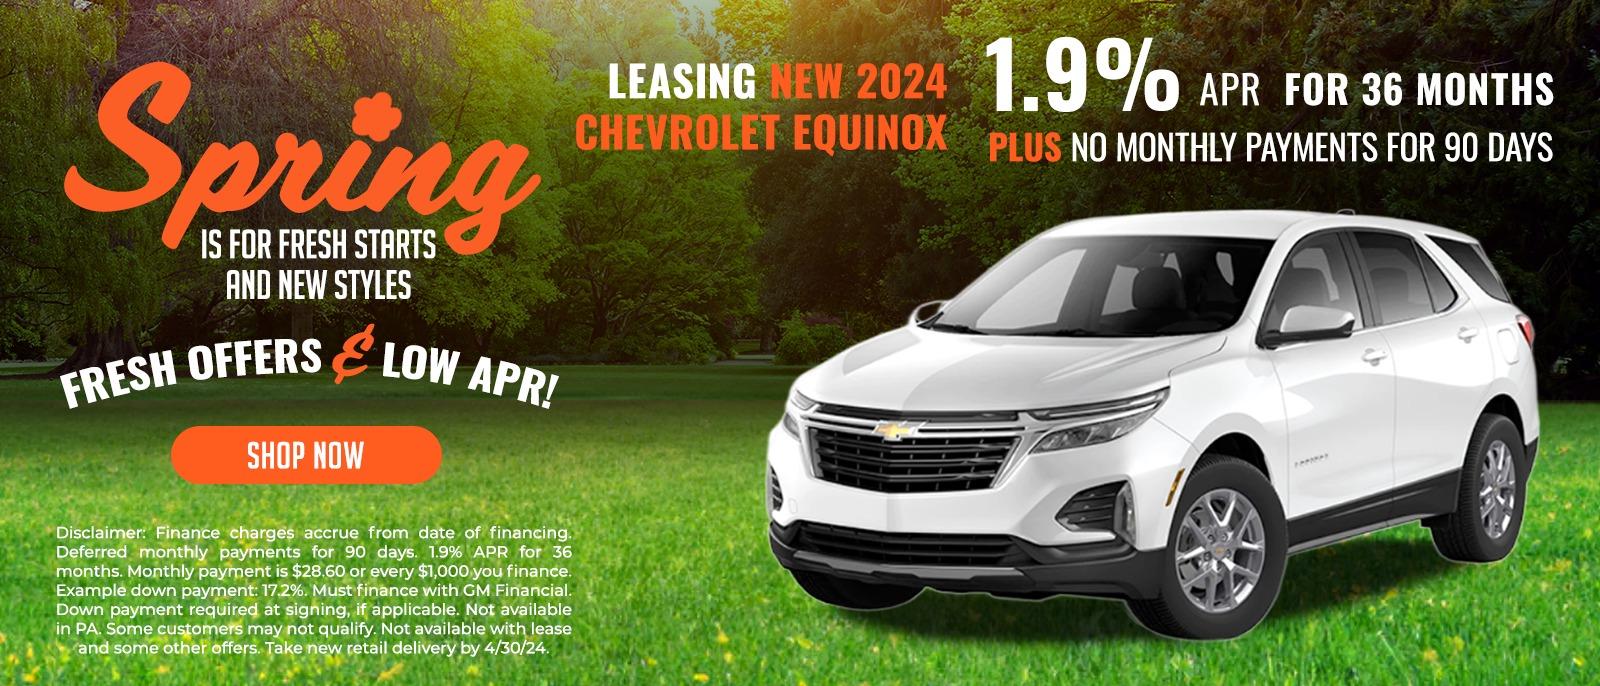 1.9% APR for 36 Months + No Monthly Payments for 90 Days Leasing New 2024 Chevrolet Equinox